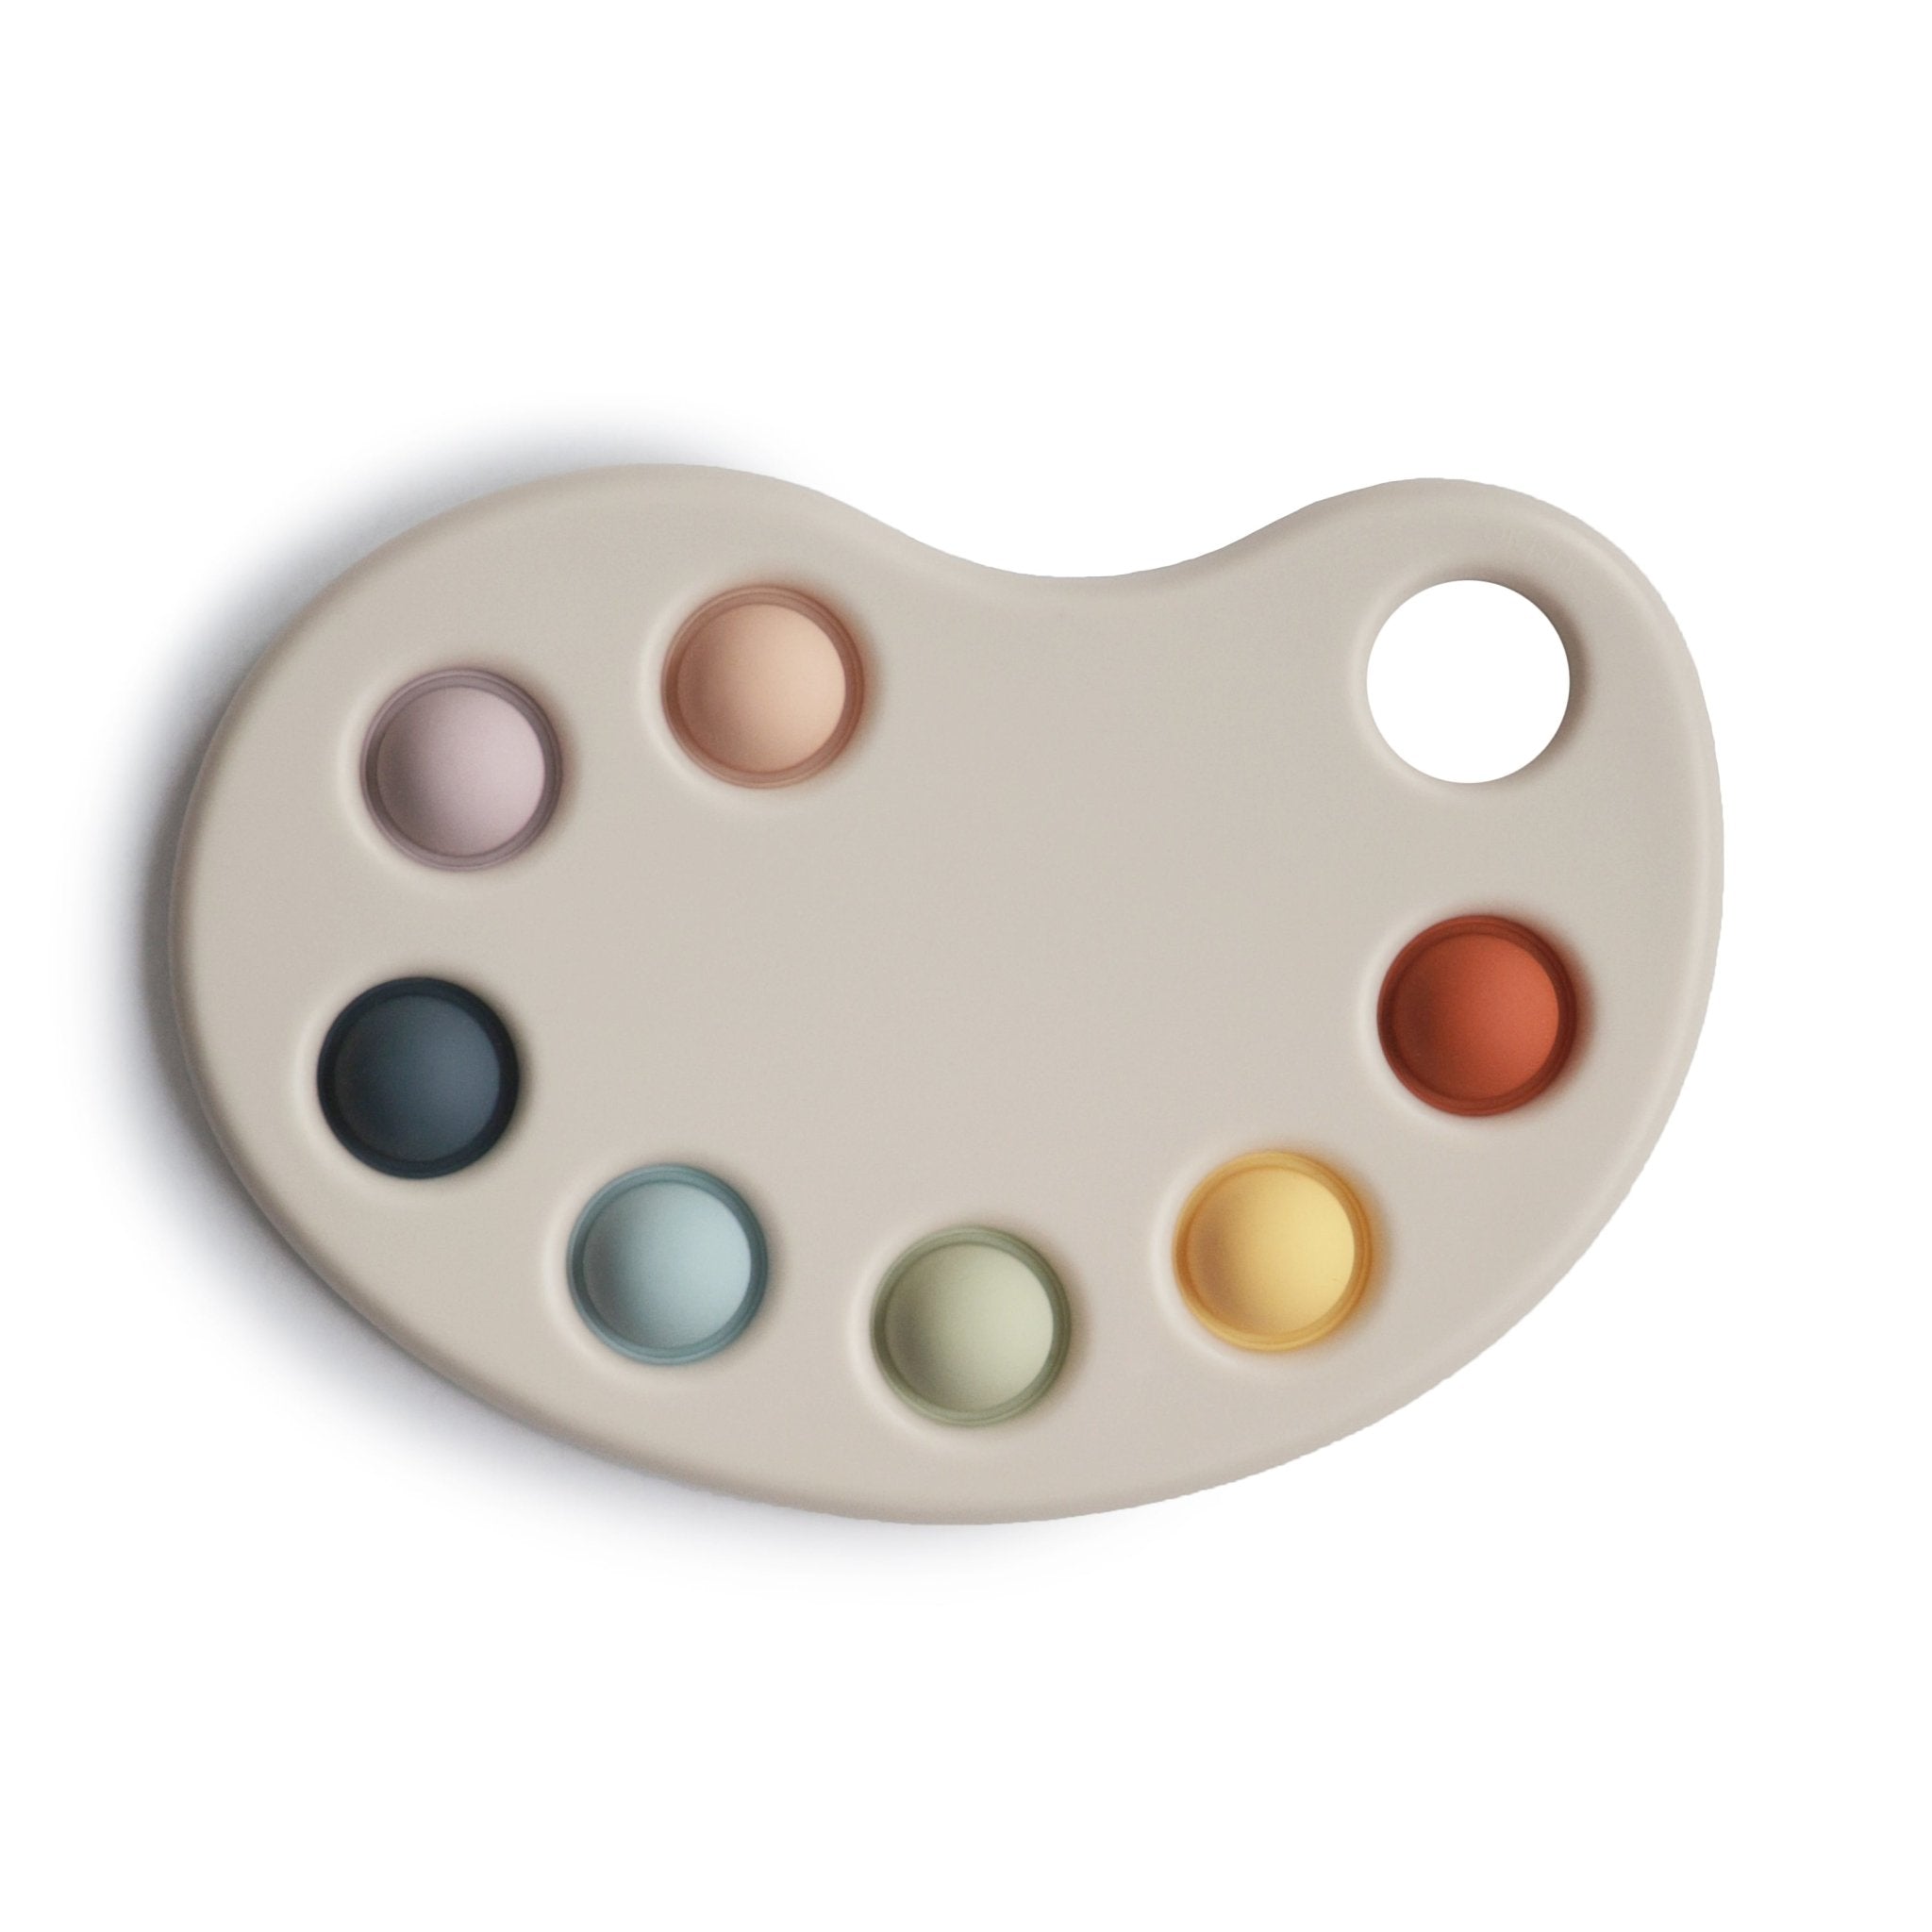 Mushie Paint Palette Press Toy - ANB Baby -8100524660881+ years